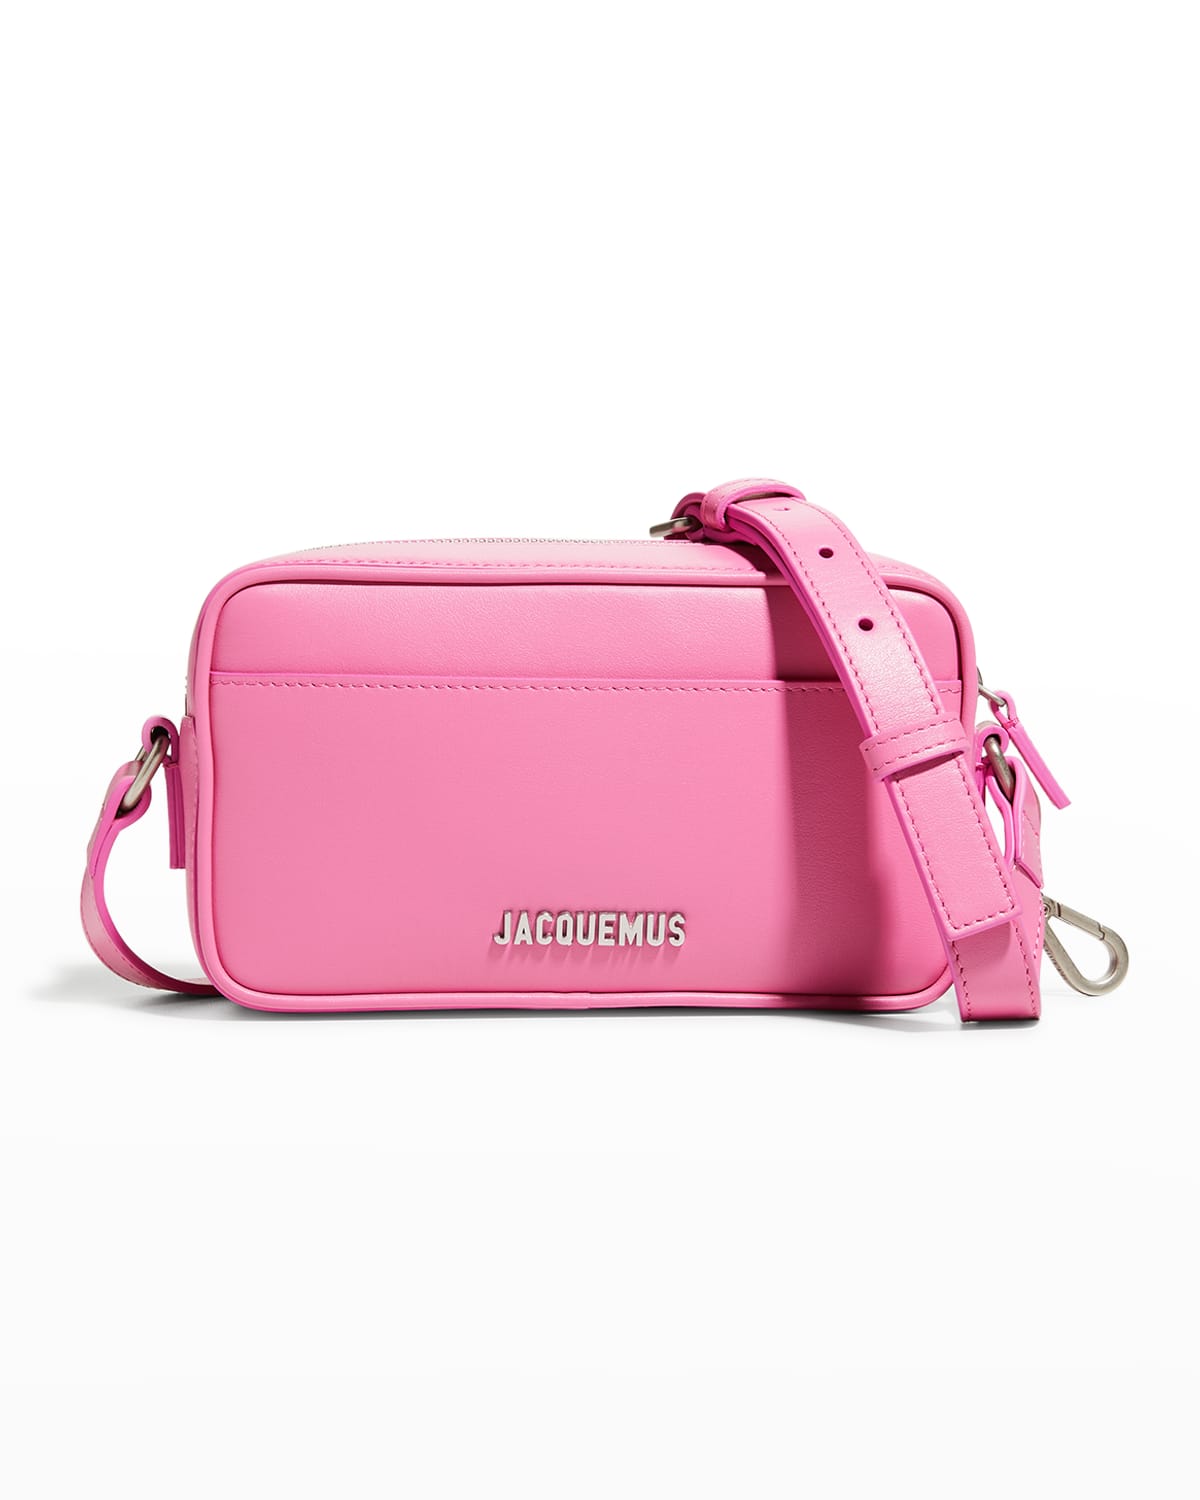 Jacquemus Le Baneto Zip Leather Crossbody Bag In Light Pink | ModeSens